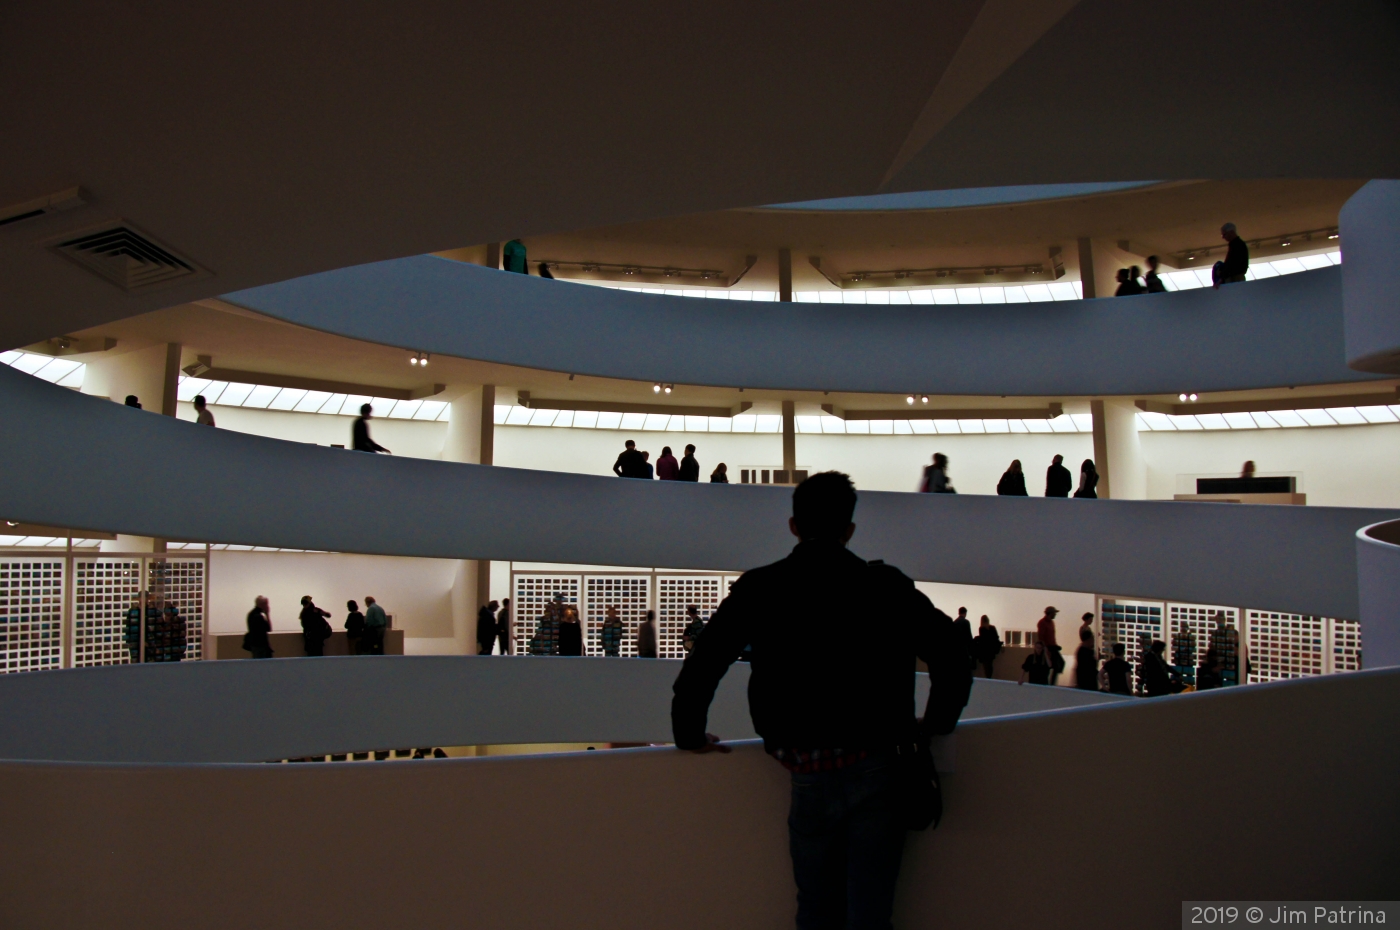 People watching at the Guggenheim by Jim Patrina